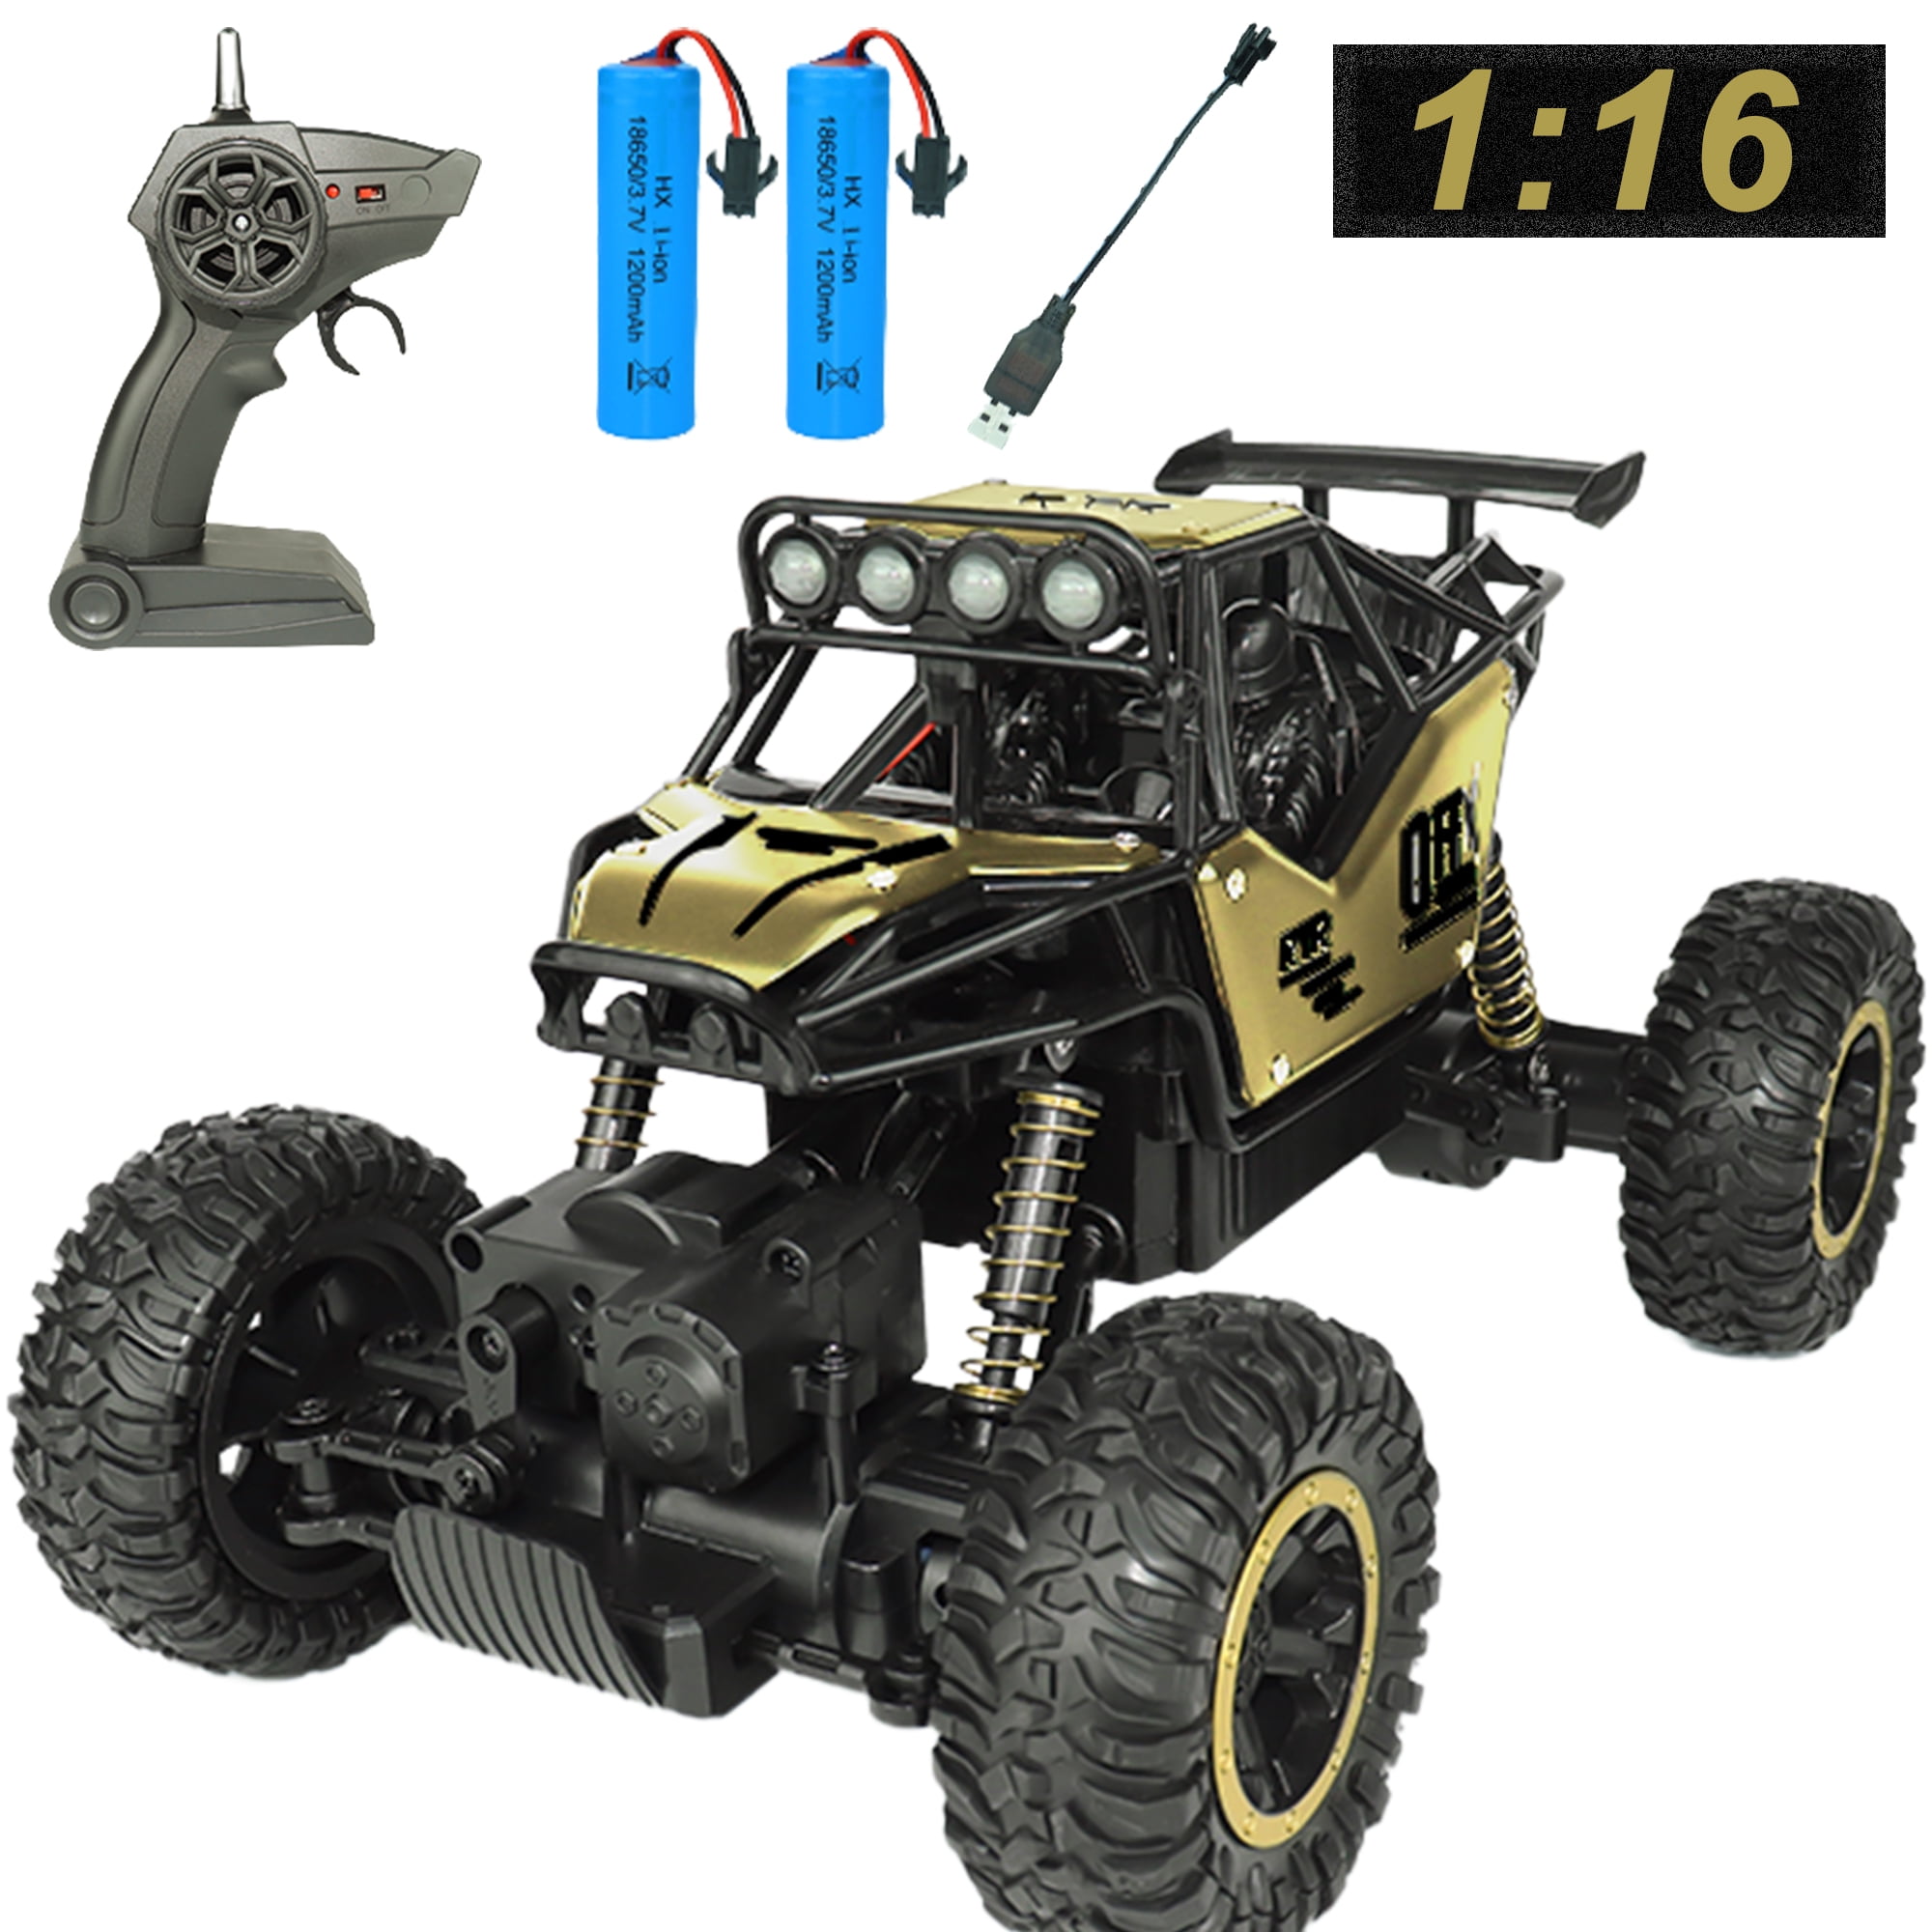 Q130 2.4G 70KM/H 4WD RC Car With Light Brushless Motor Remote Control Cars  High Speed Drift Monster Truck Toy For Adults Kids